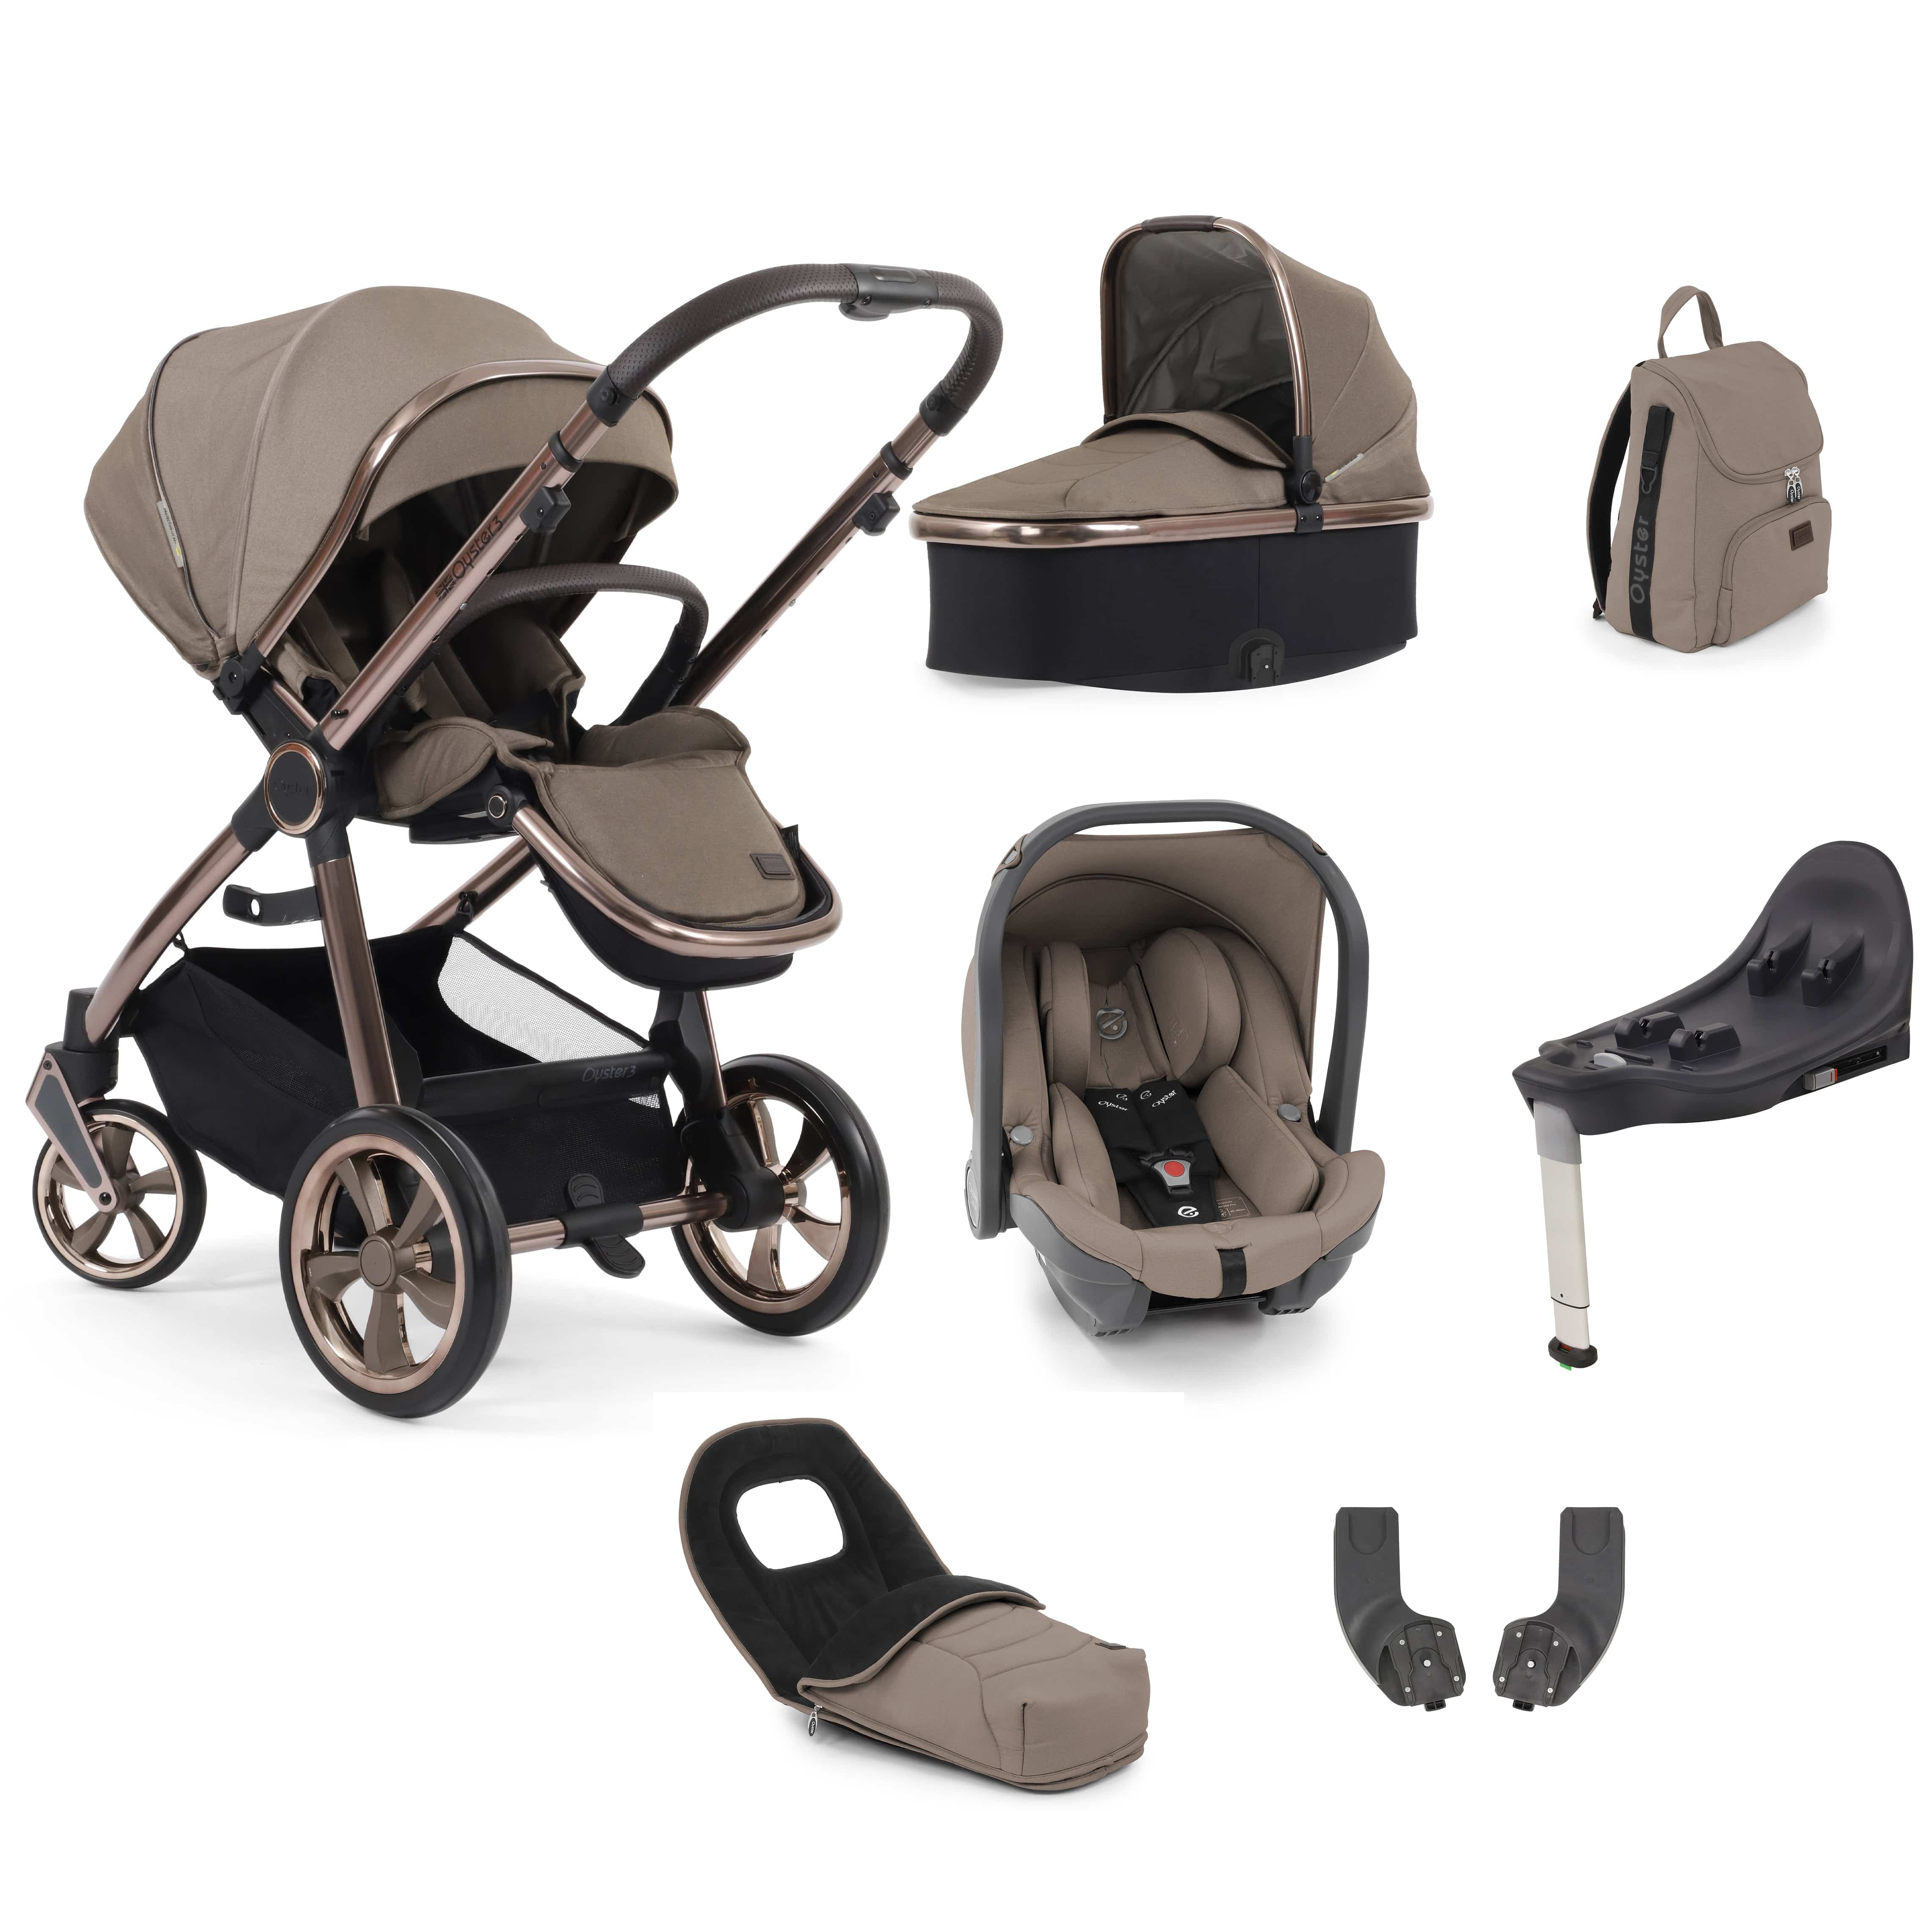 Babystyle Oyster 3 Luxury 7 Piece with Car Seat Bundle in Mink Travel Systems 14773-MNK 5060711566894